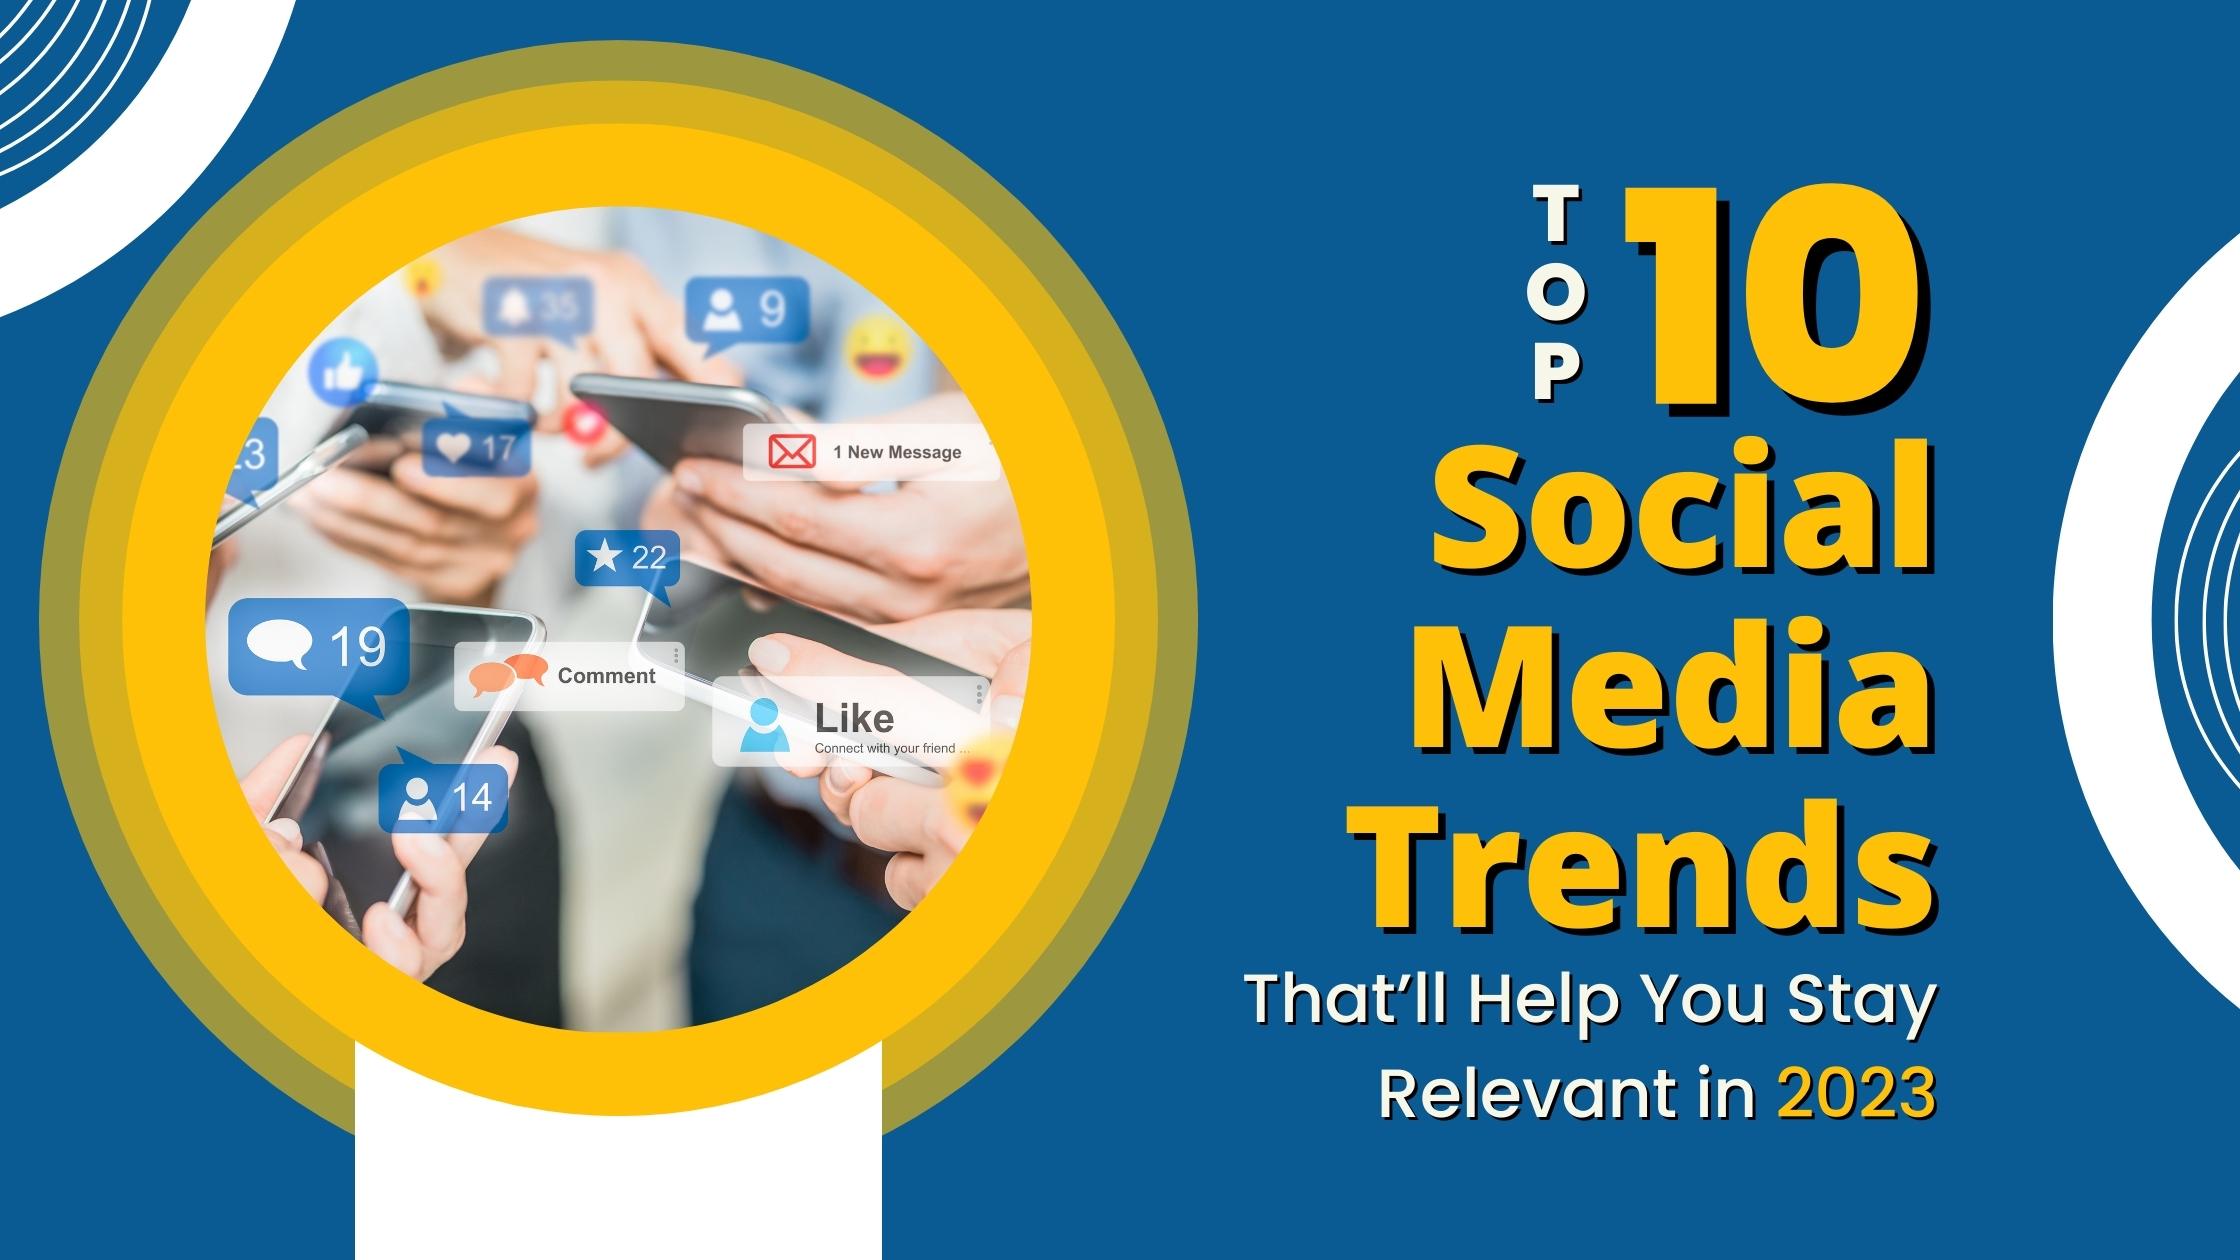 Top 10 Social Media Trends That'll Help You Stay Relevant in 2023